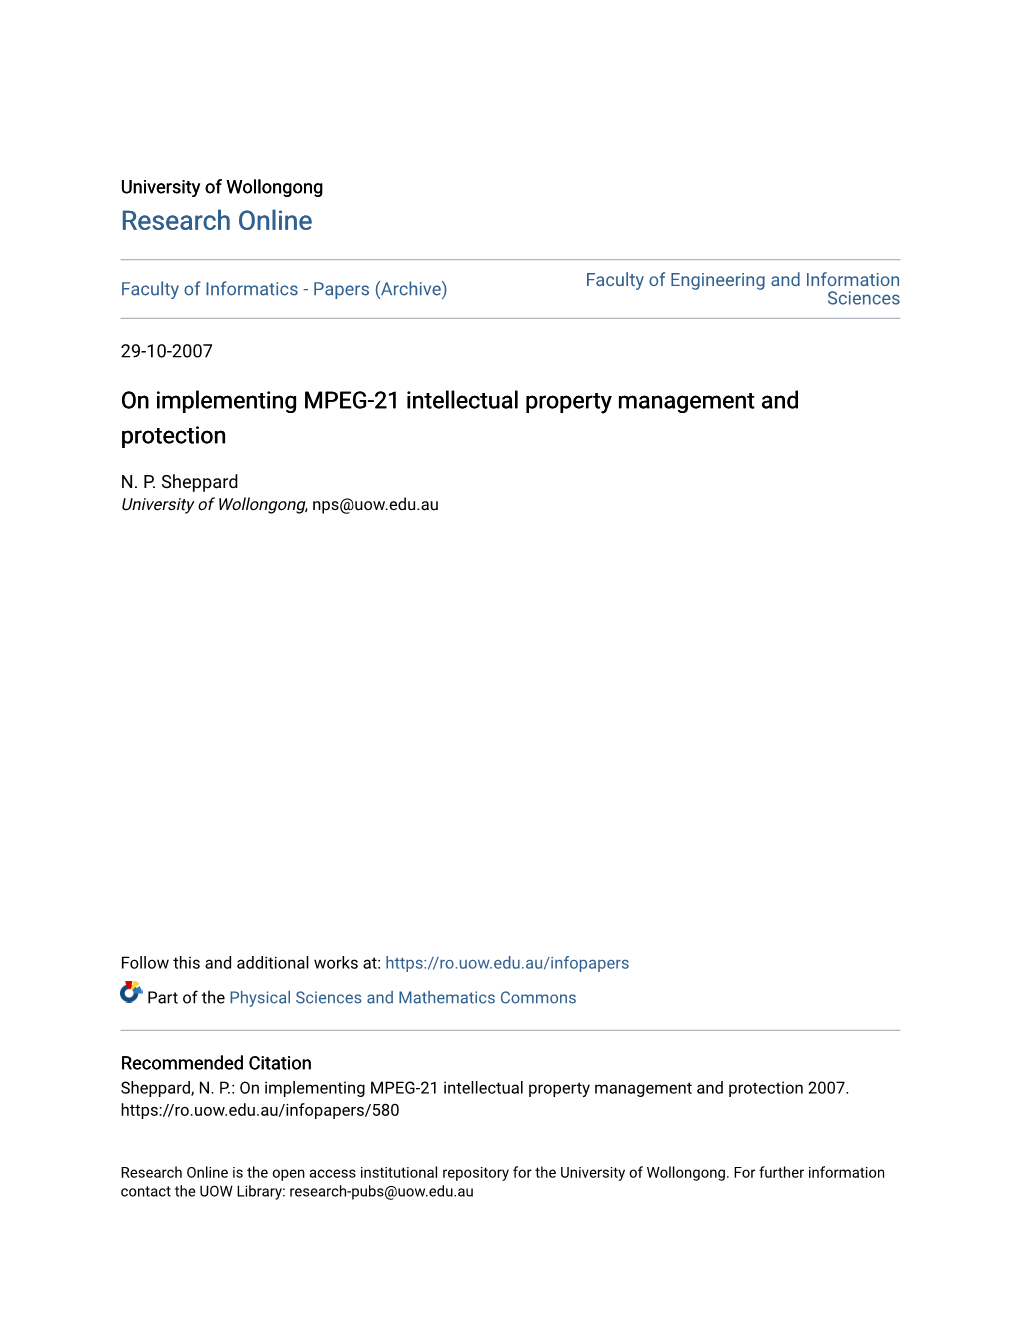 On Implementing MPEG-21 Intellectual Property Management and Protection